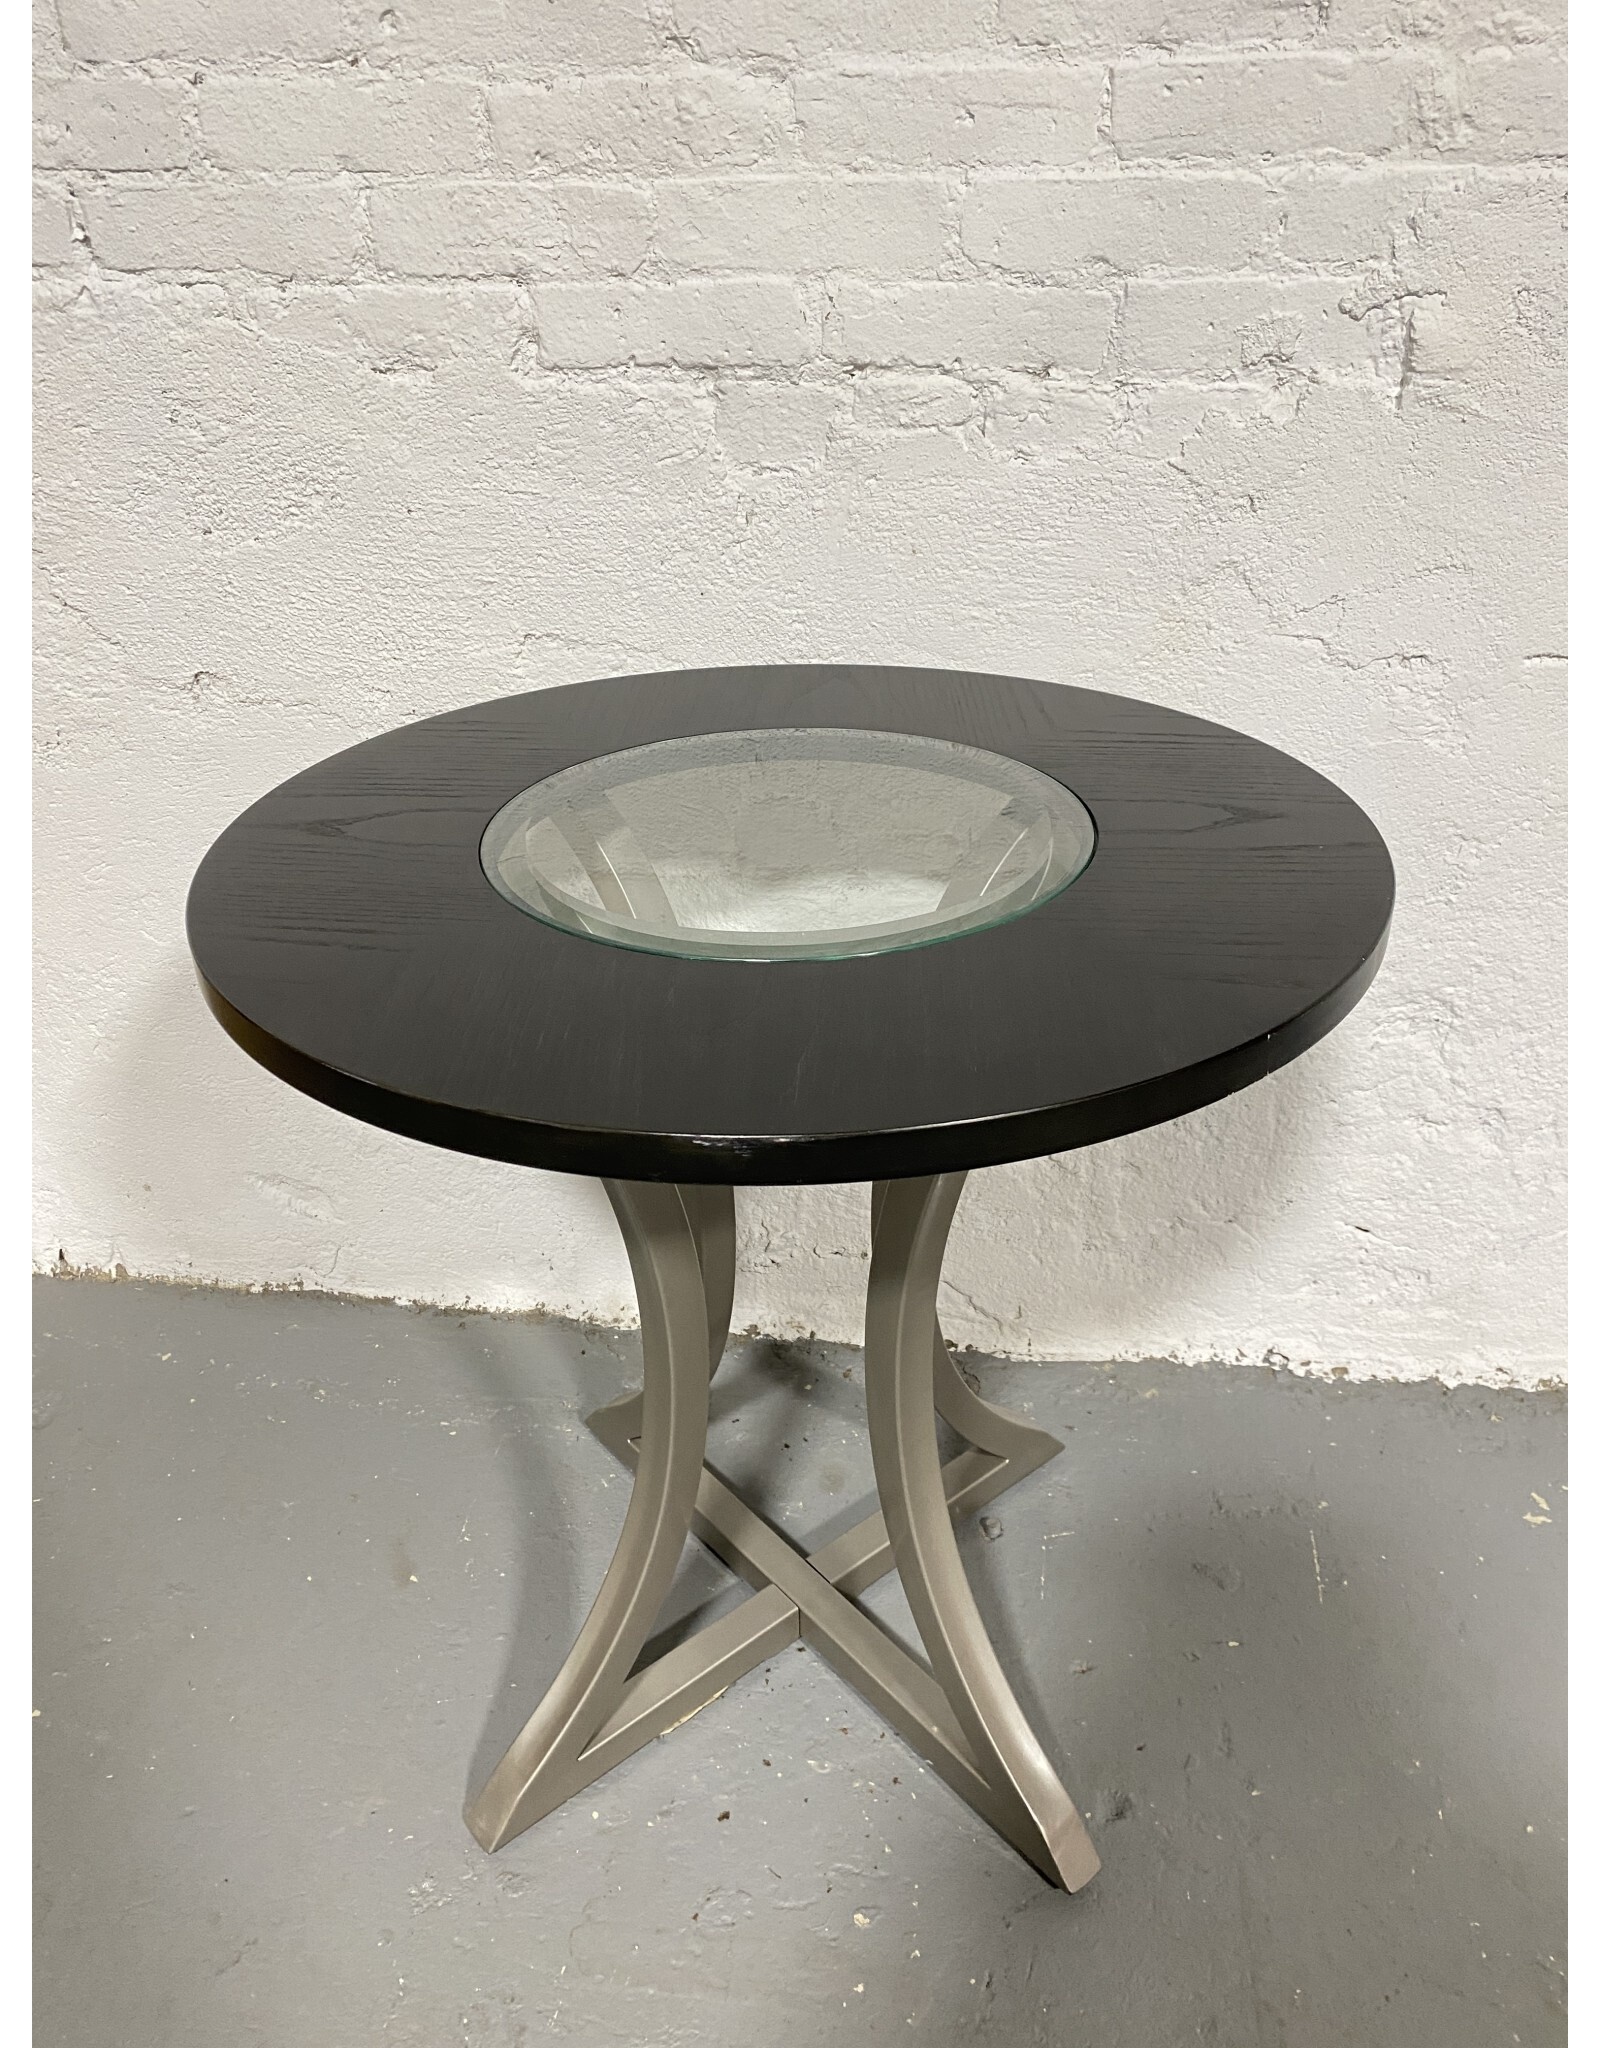 Hillsdale Circular Side Table, with Removable Glass